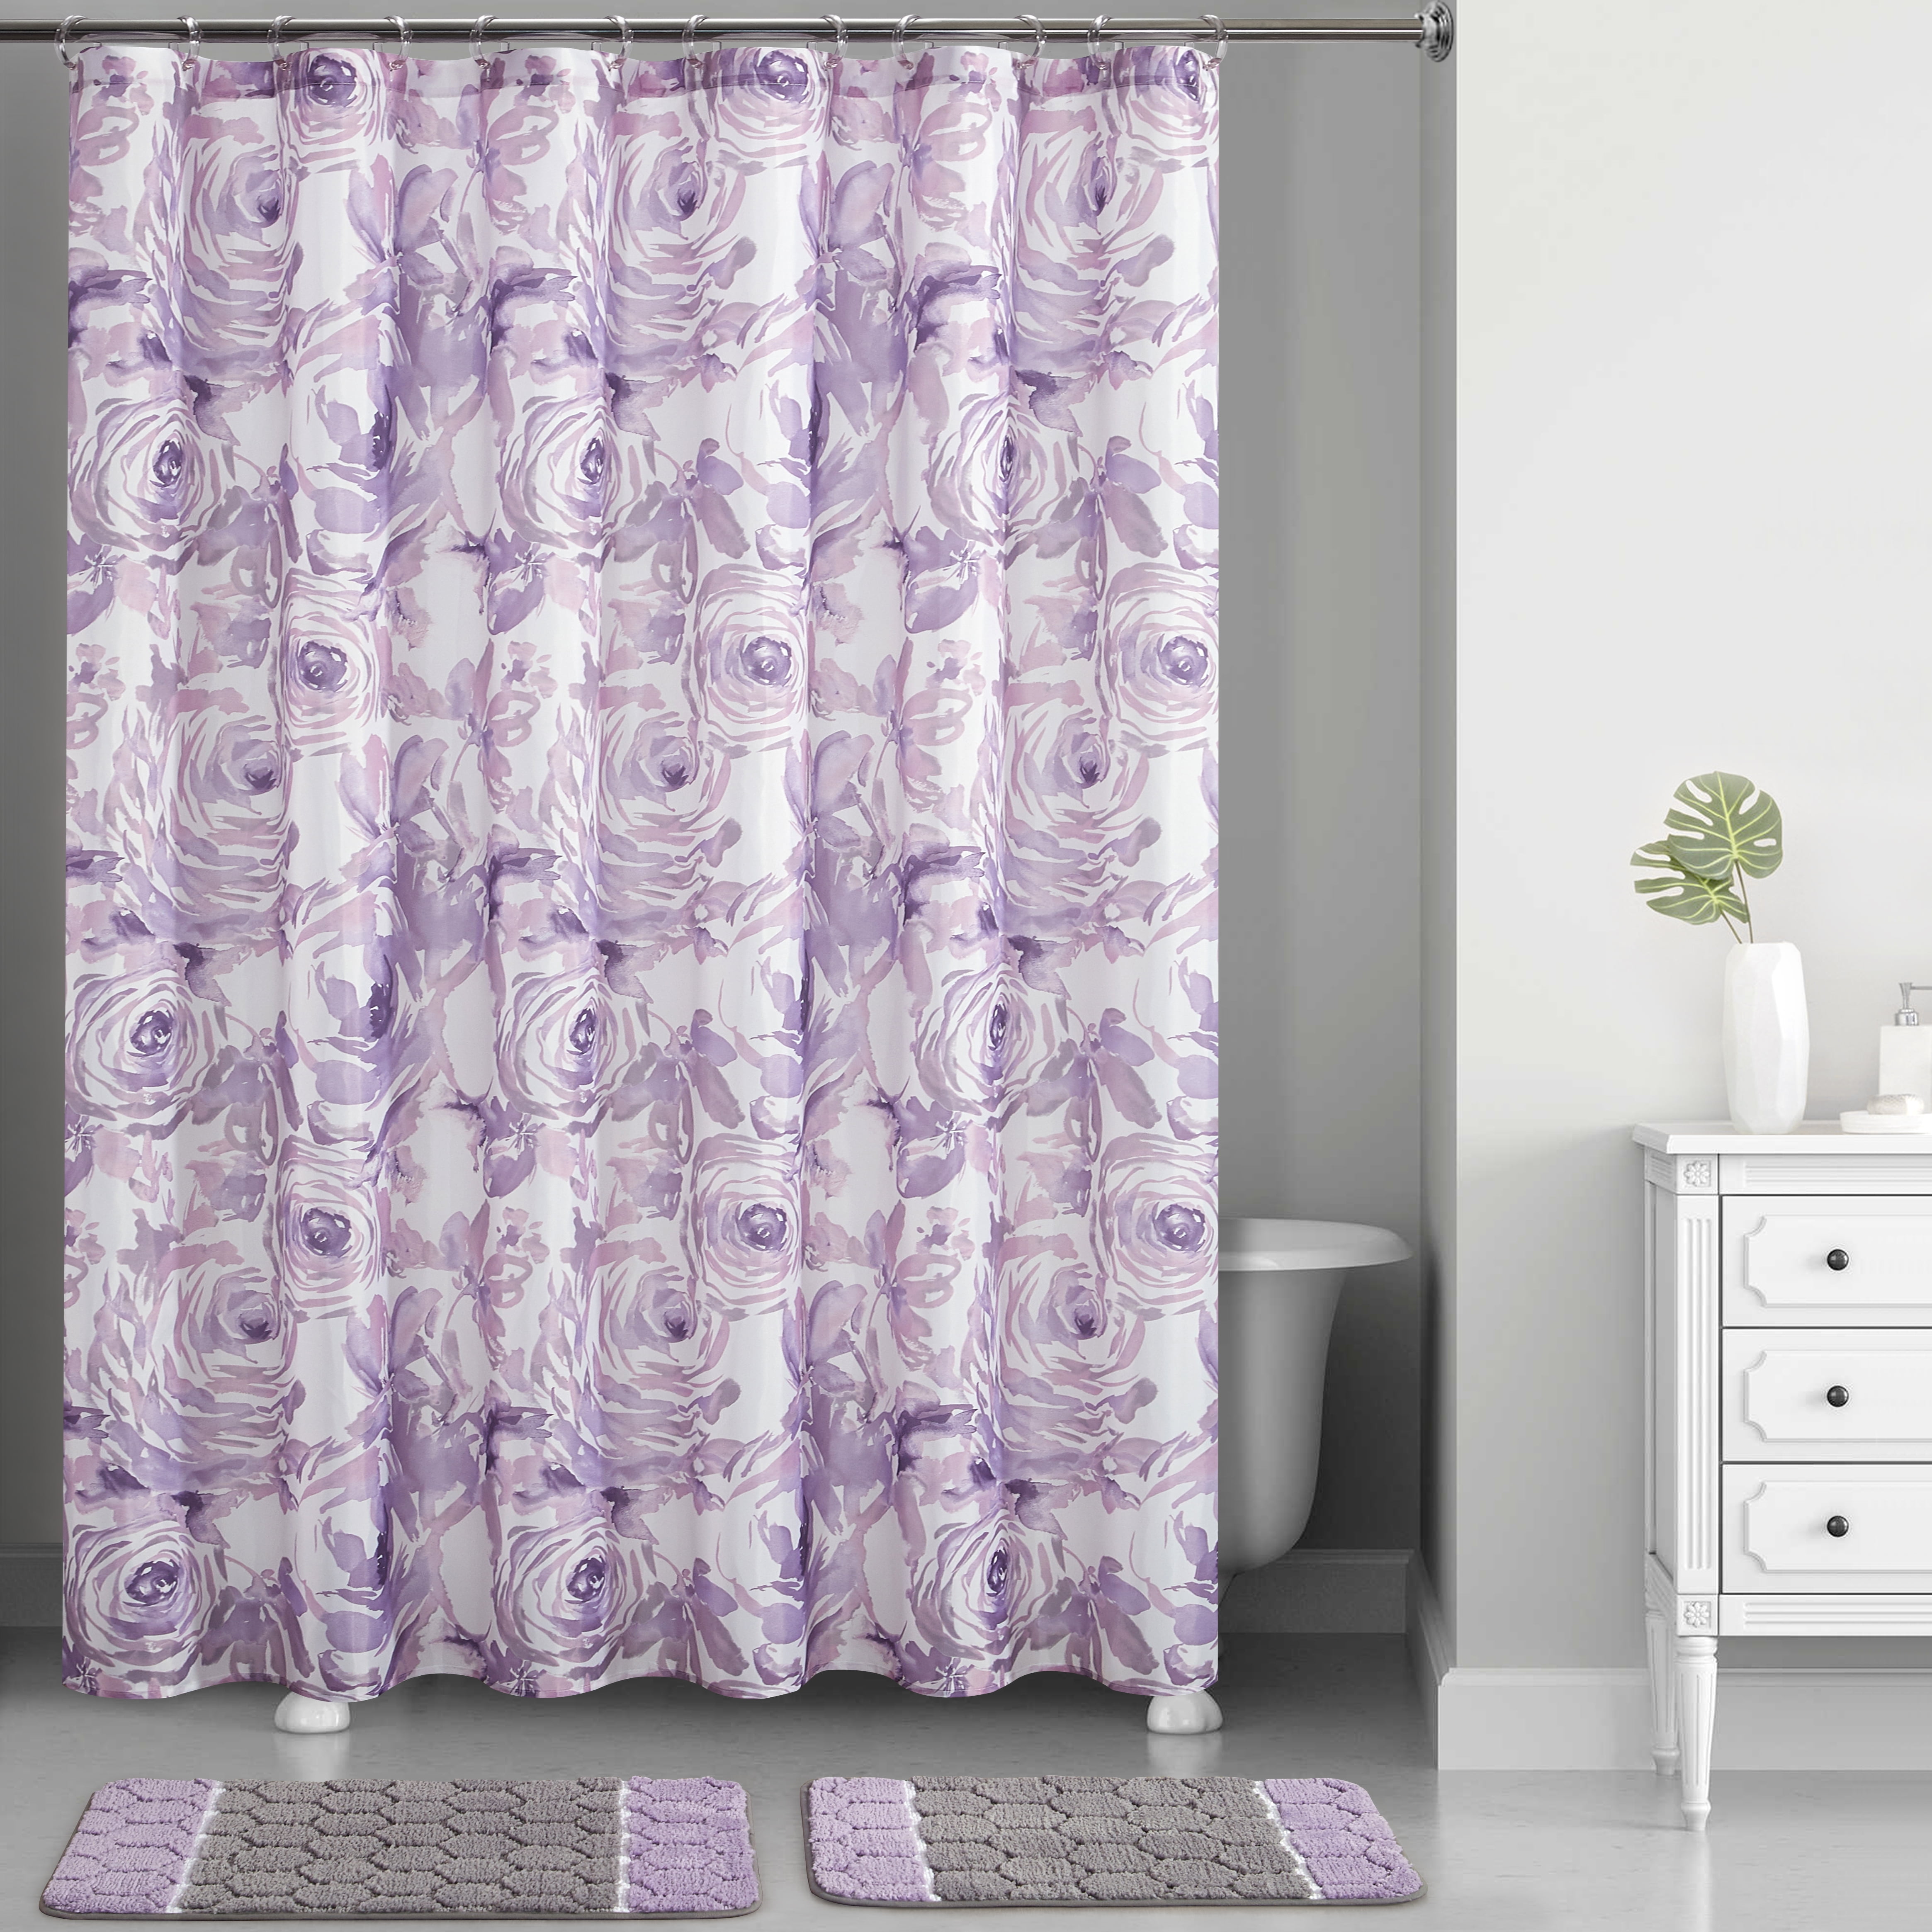 Mainstays Lavender Fl Watercolor, Pink And Gray Flower Shower Curtain